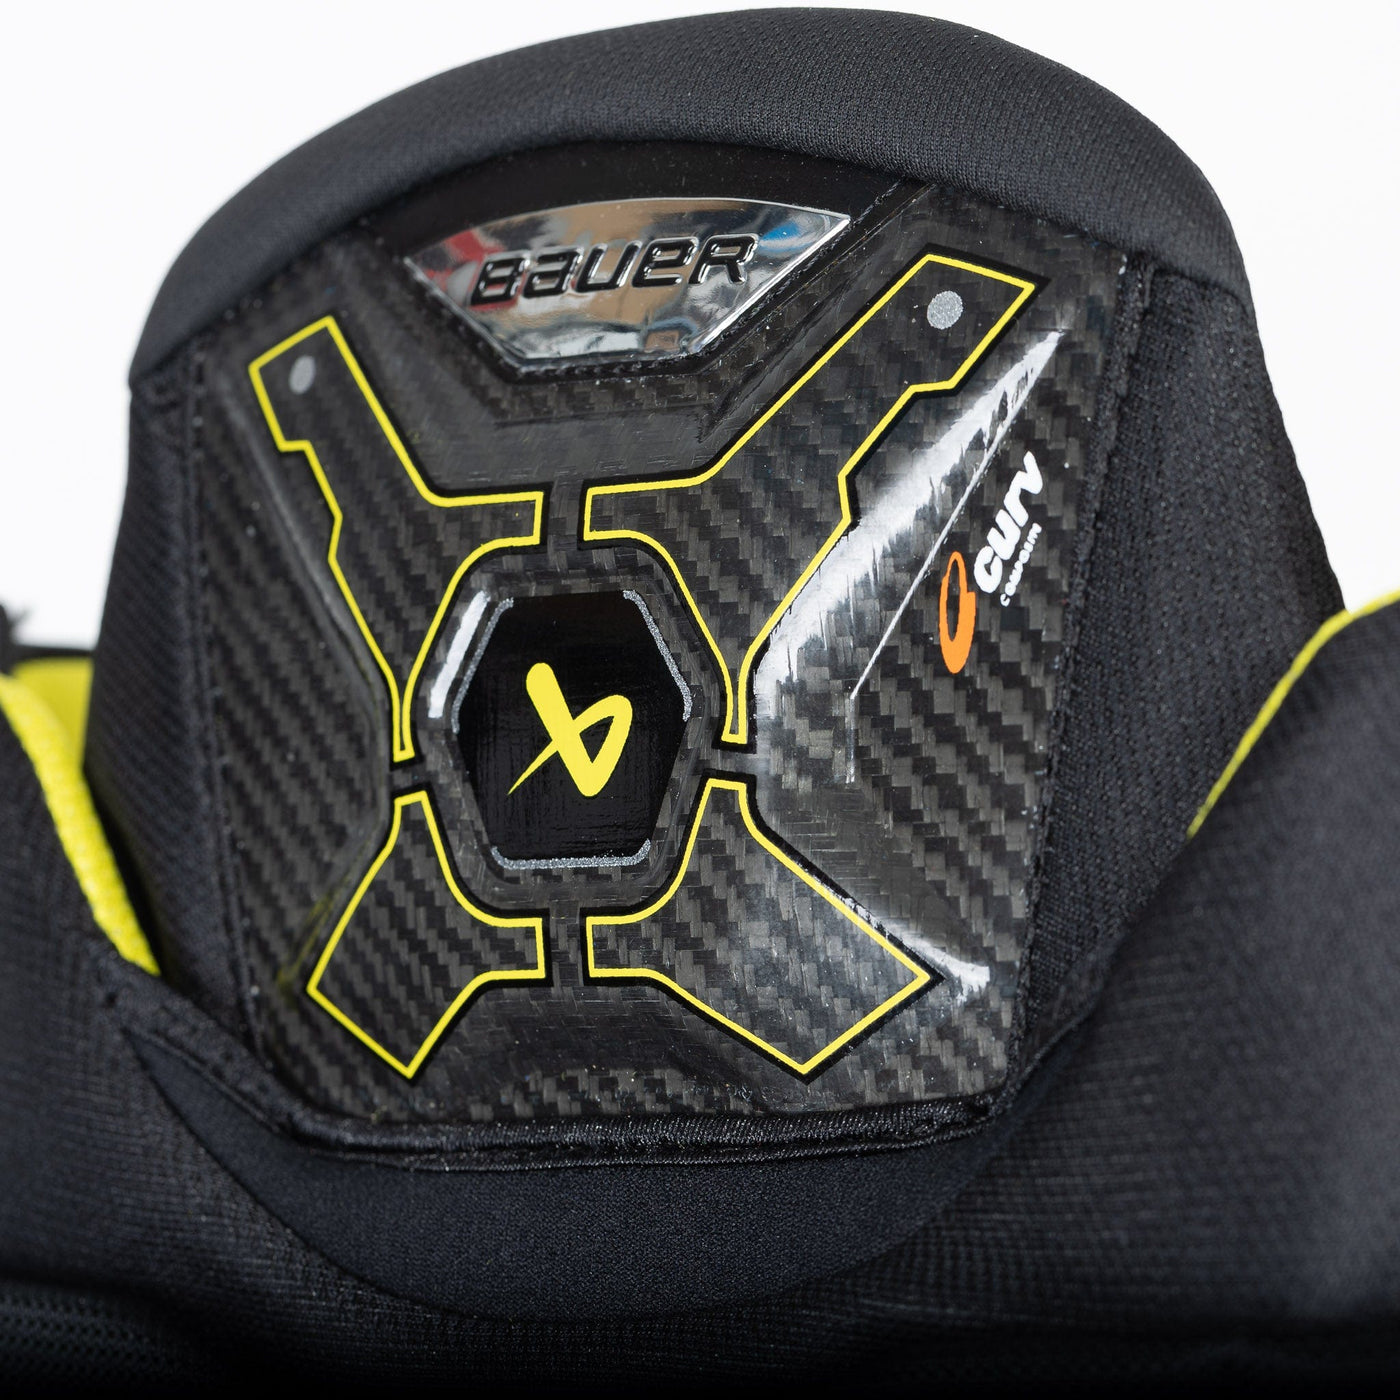 Bauer Supreme Mach Junior Hockey Pants - The Hockey Shop Source For Sports